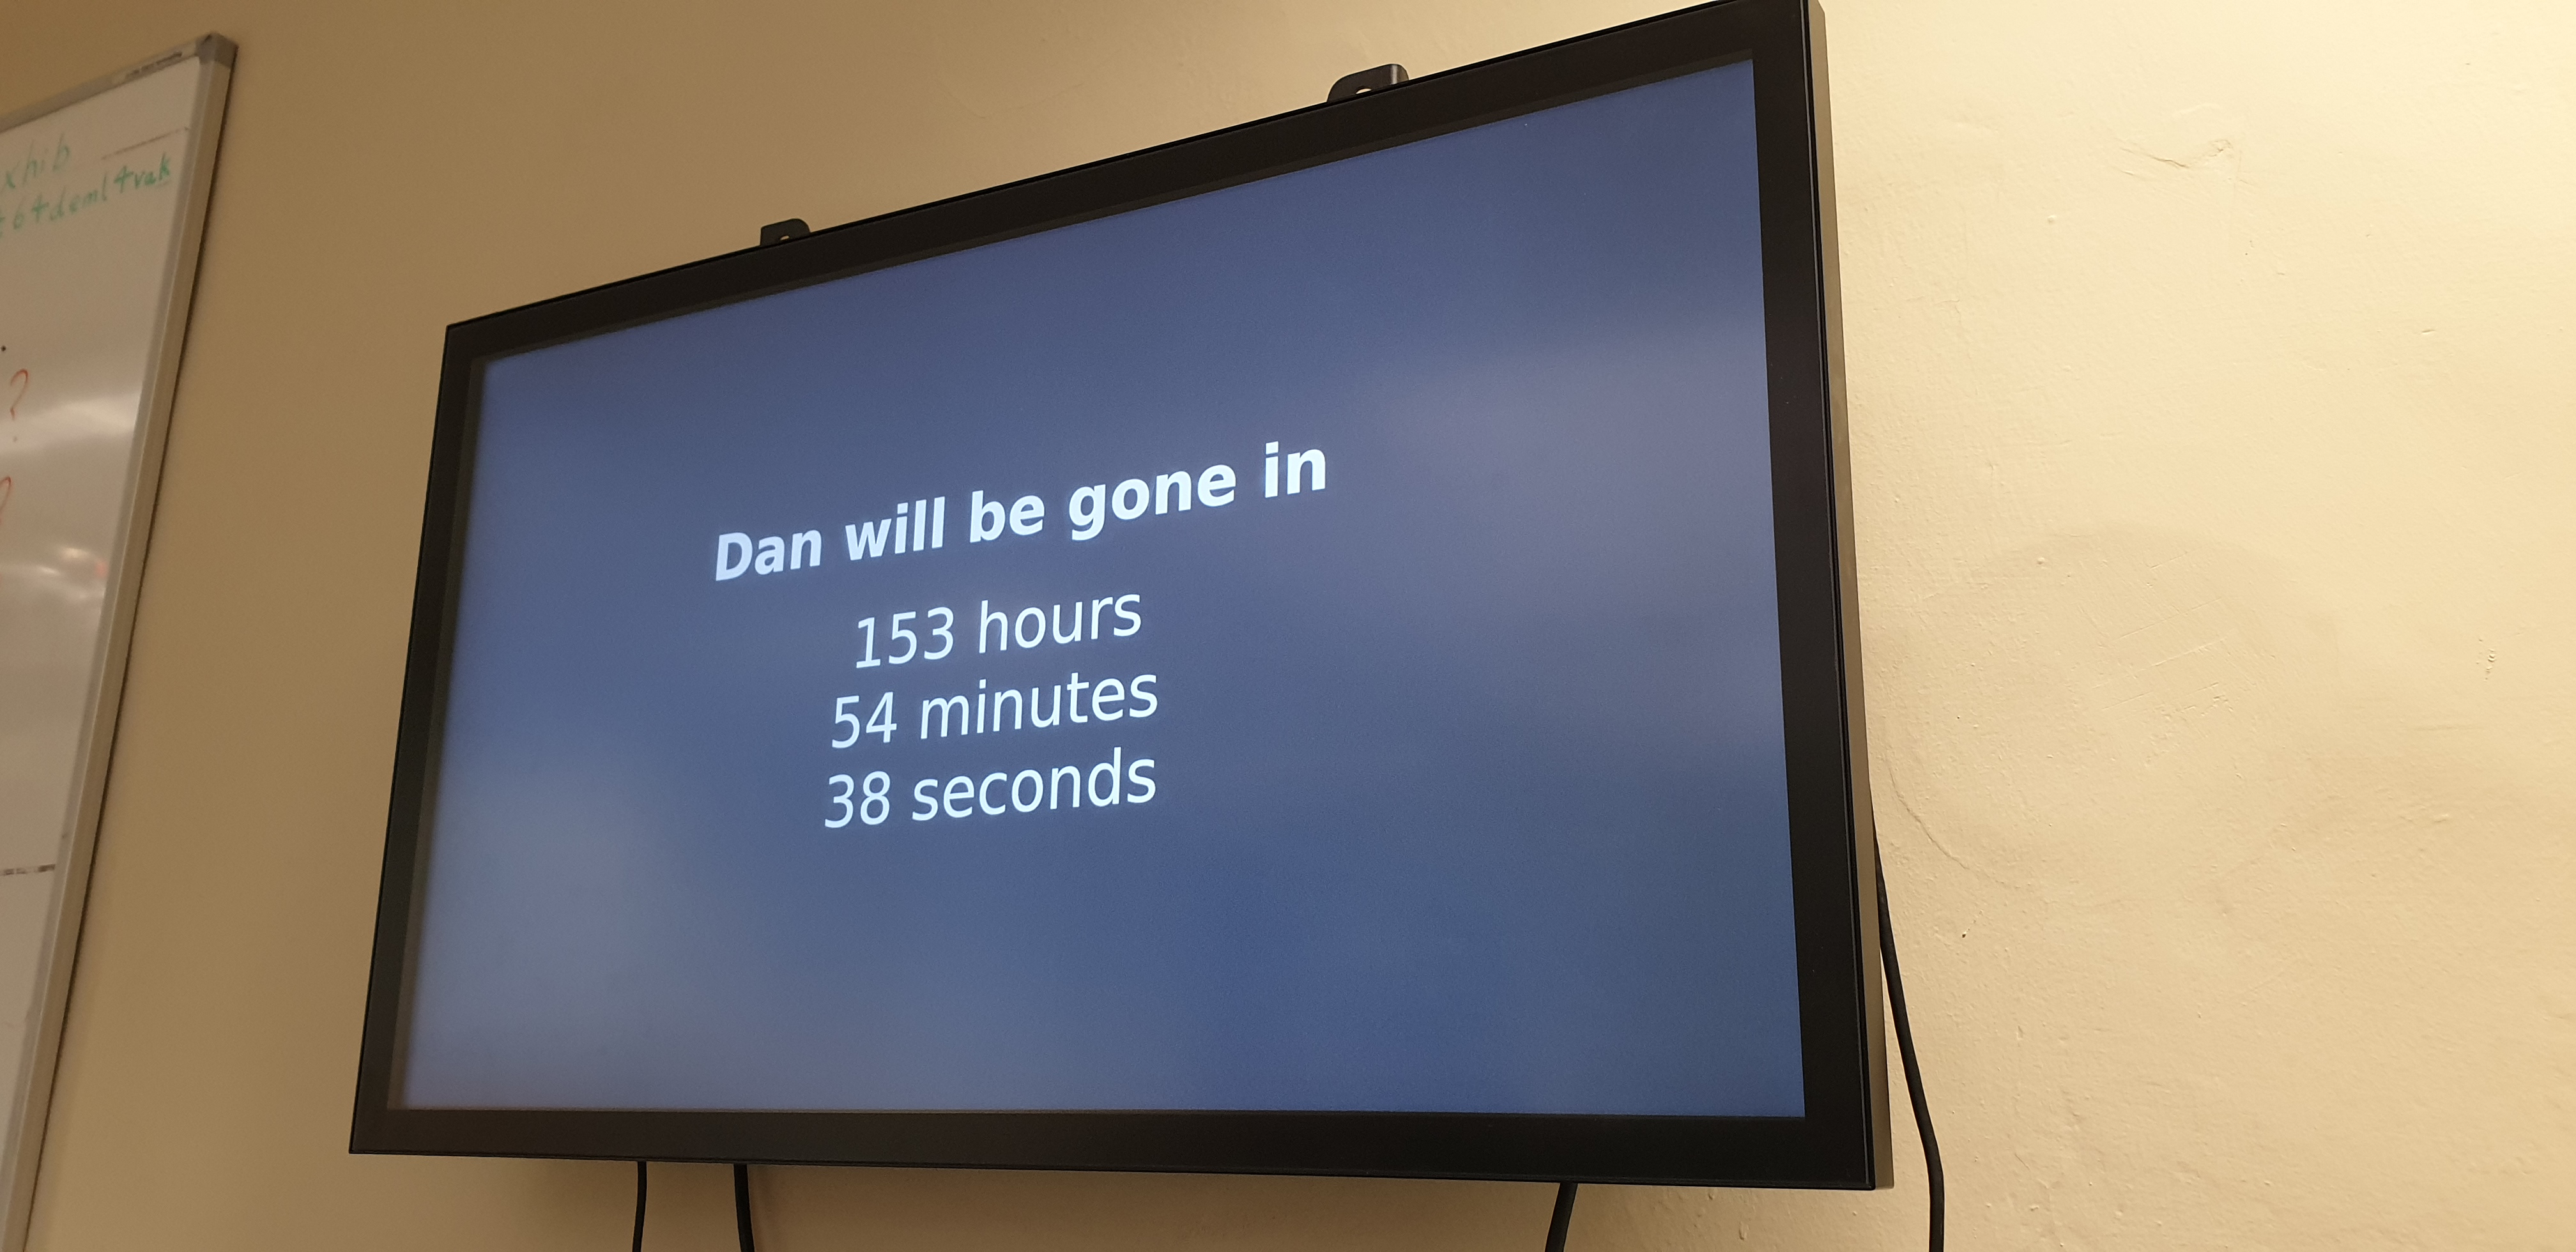 Screen showing: "Dan will be gone in 153 hours, 54 minutes, 38 seconds."